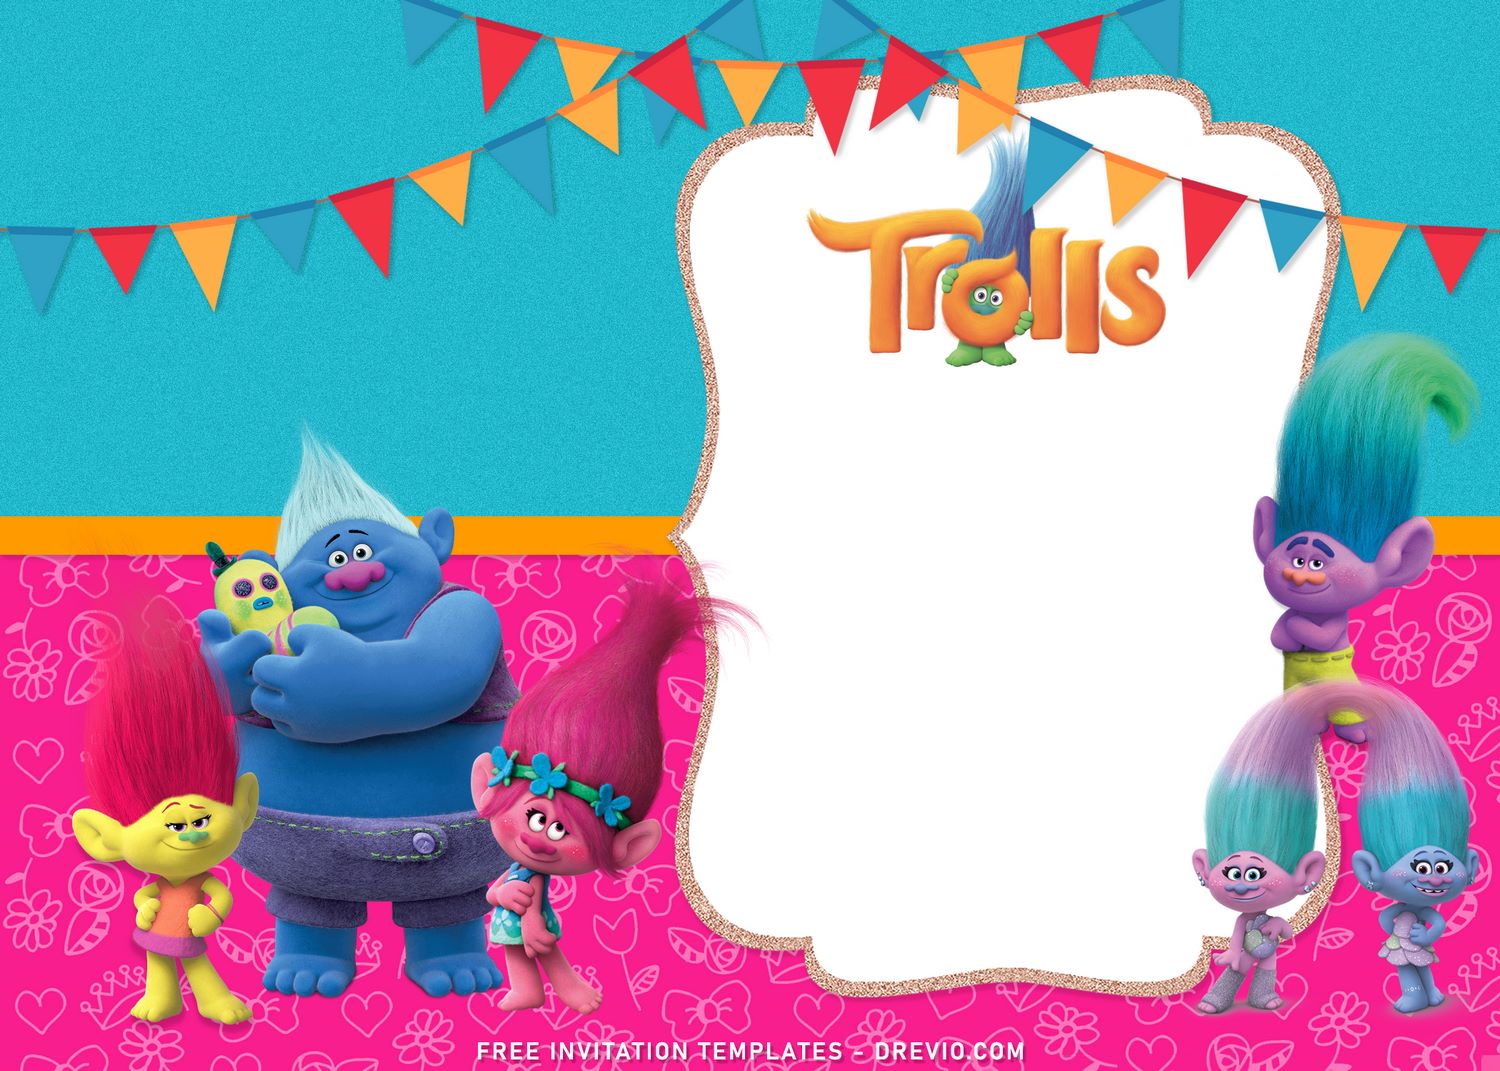 8-adorable-trolls-birthday-invitation-templates-for-your-kid-s-birthday-download-hundreds